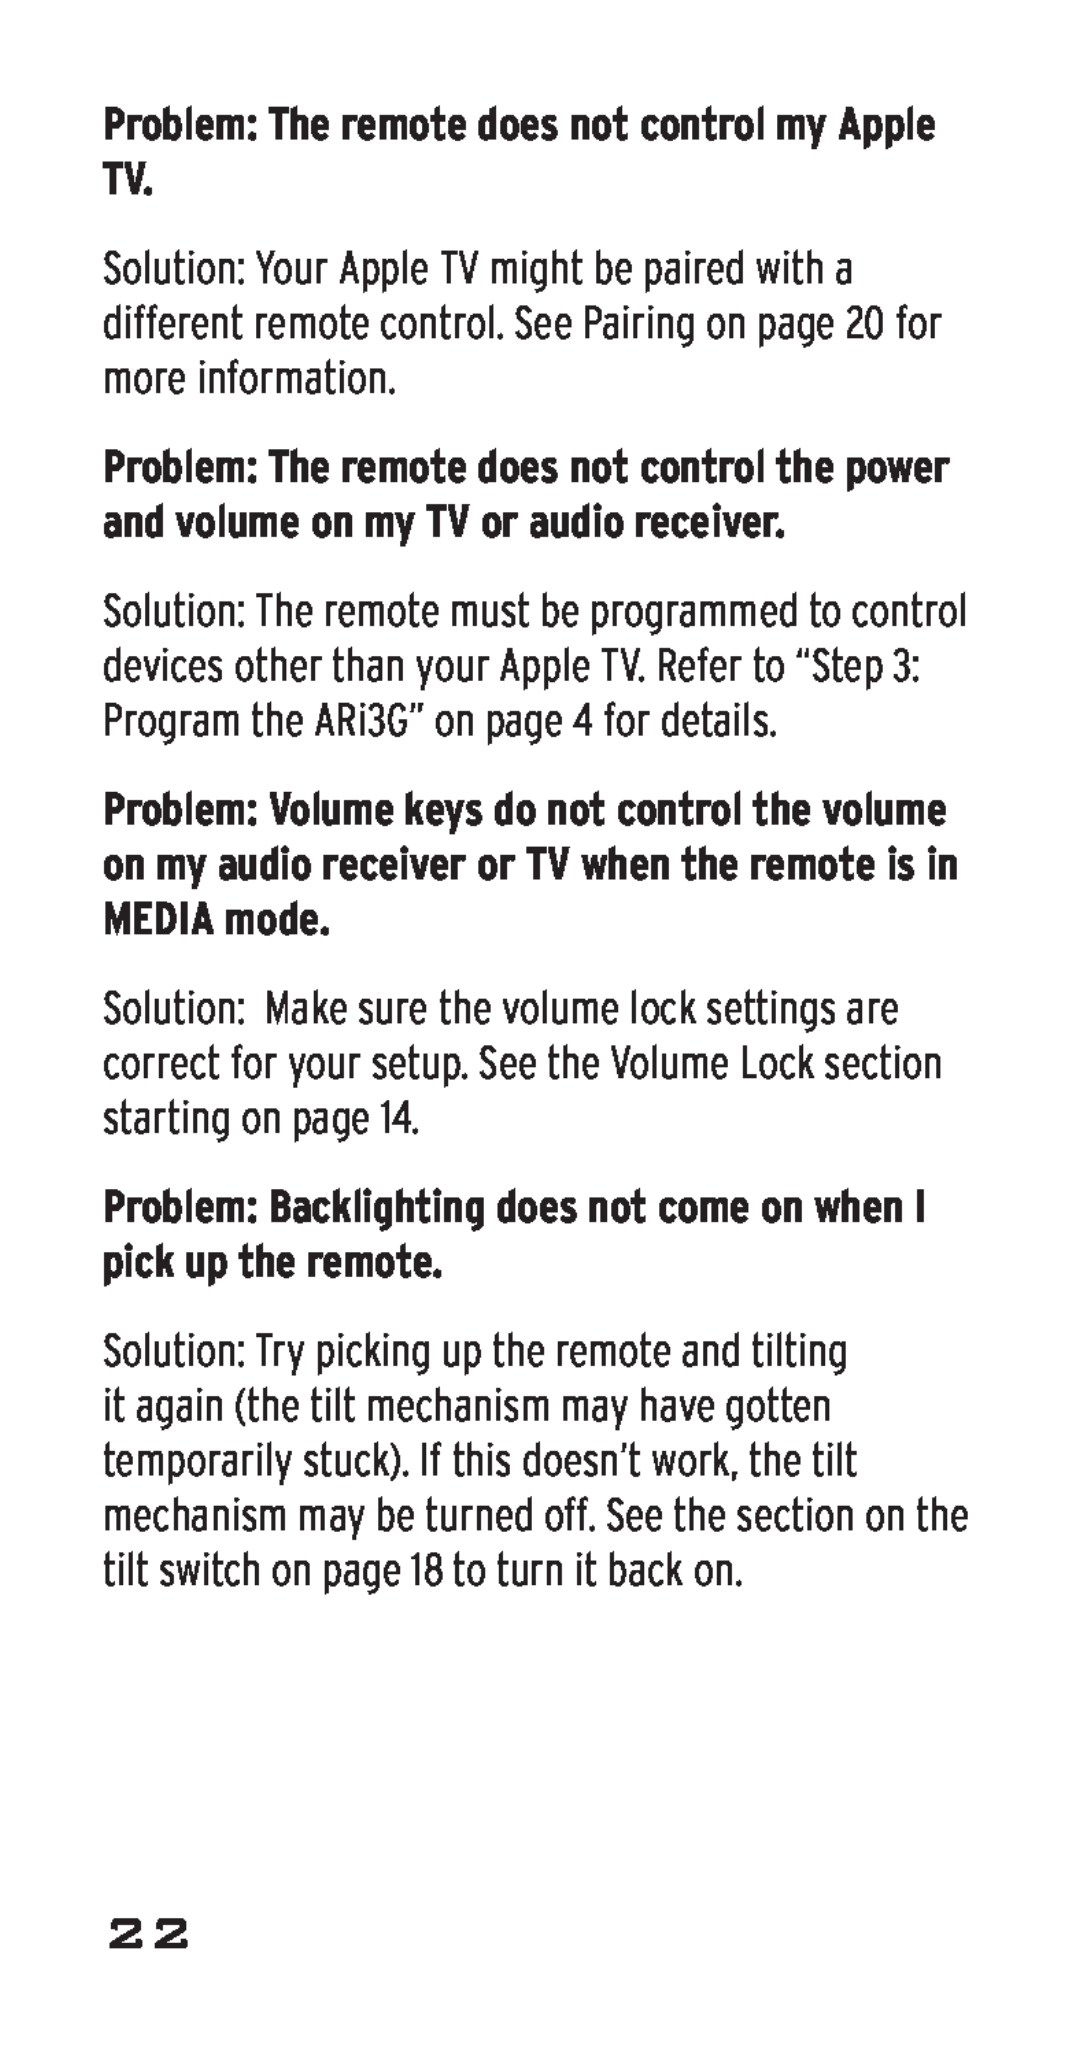 Acoustic Research ARRI03G, ARi3G manual Problem The remote does not control my Apple TV 